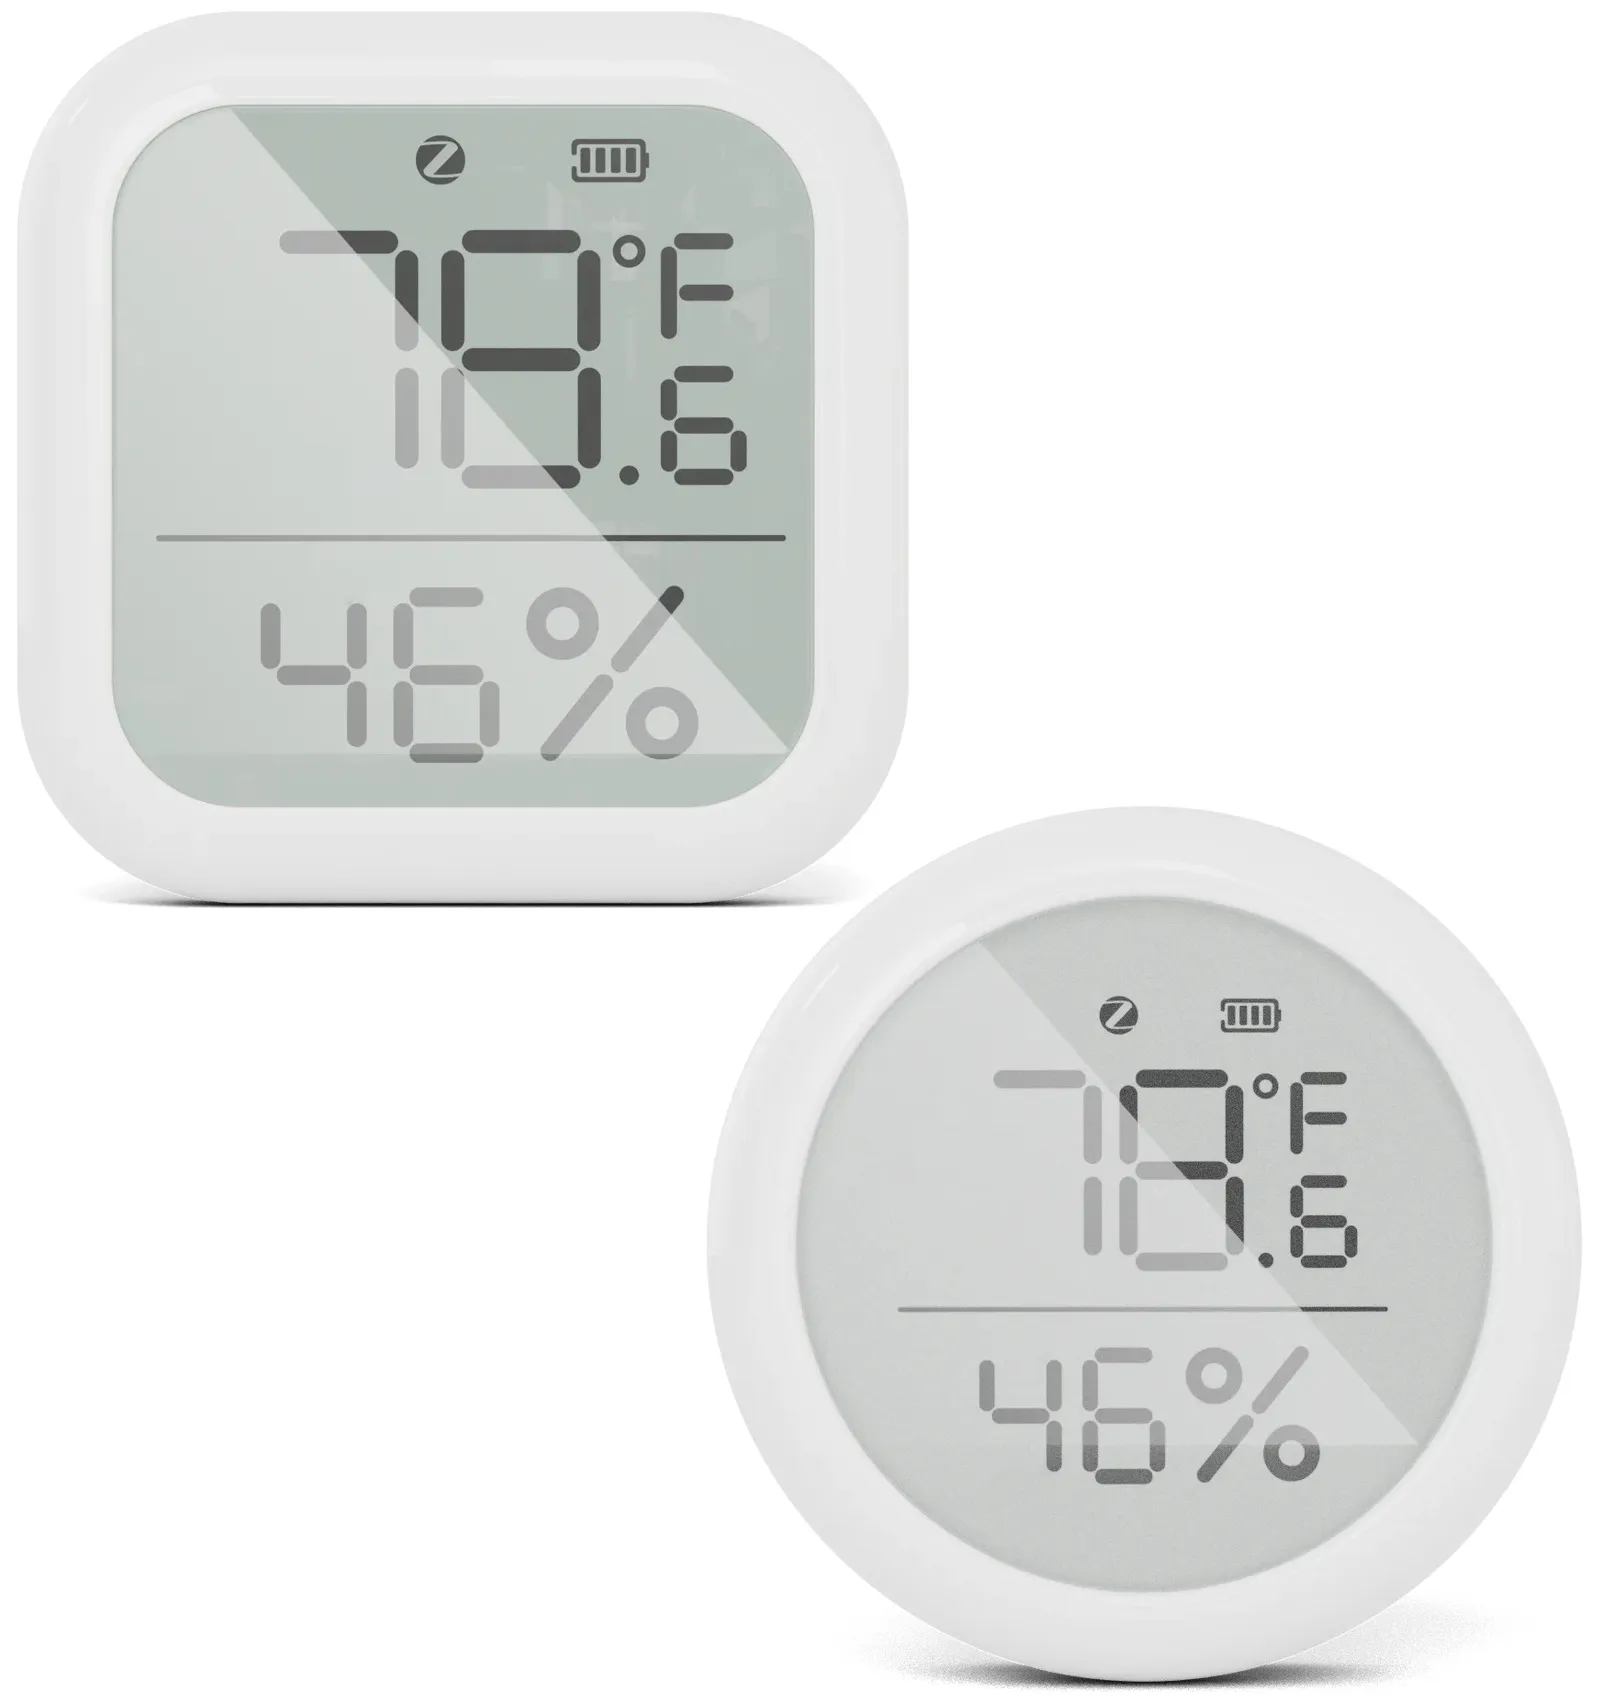 Temperature and Humidity Sensor with Display